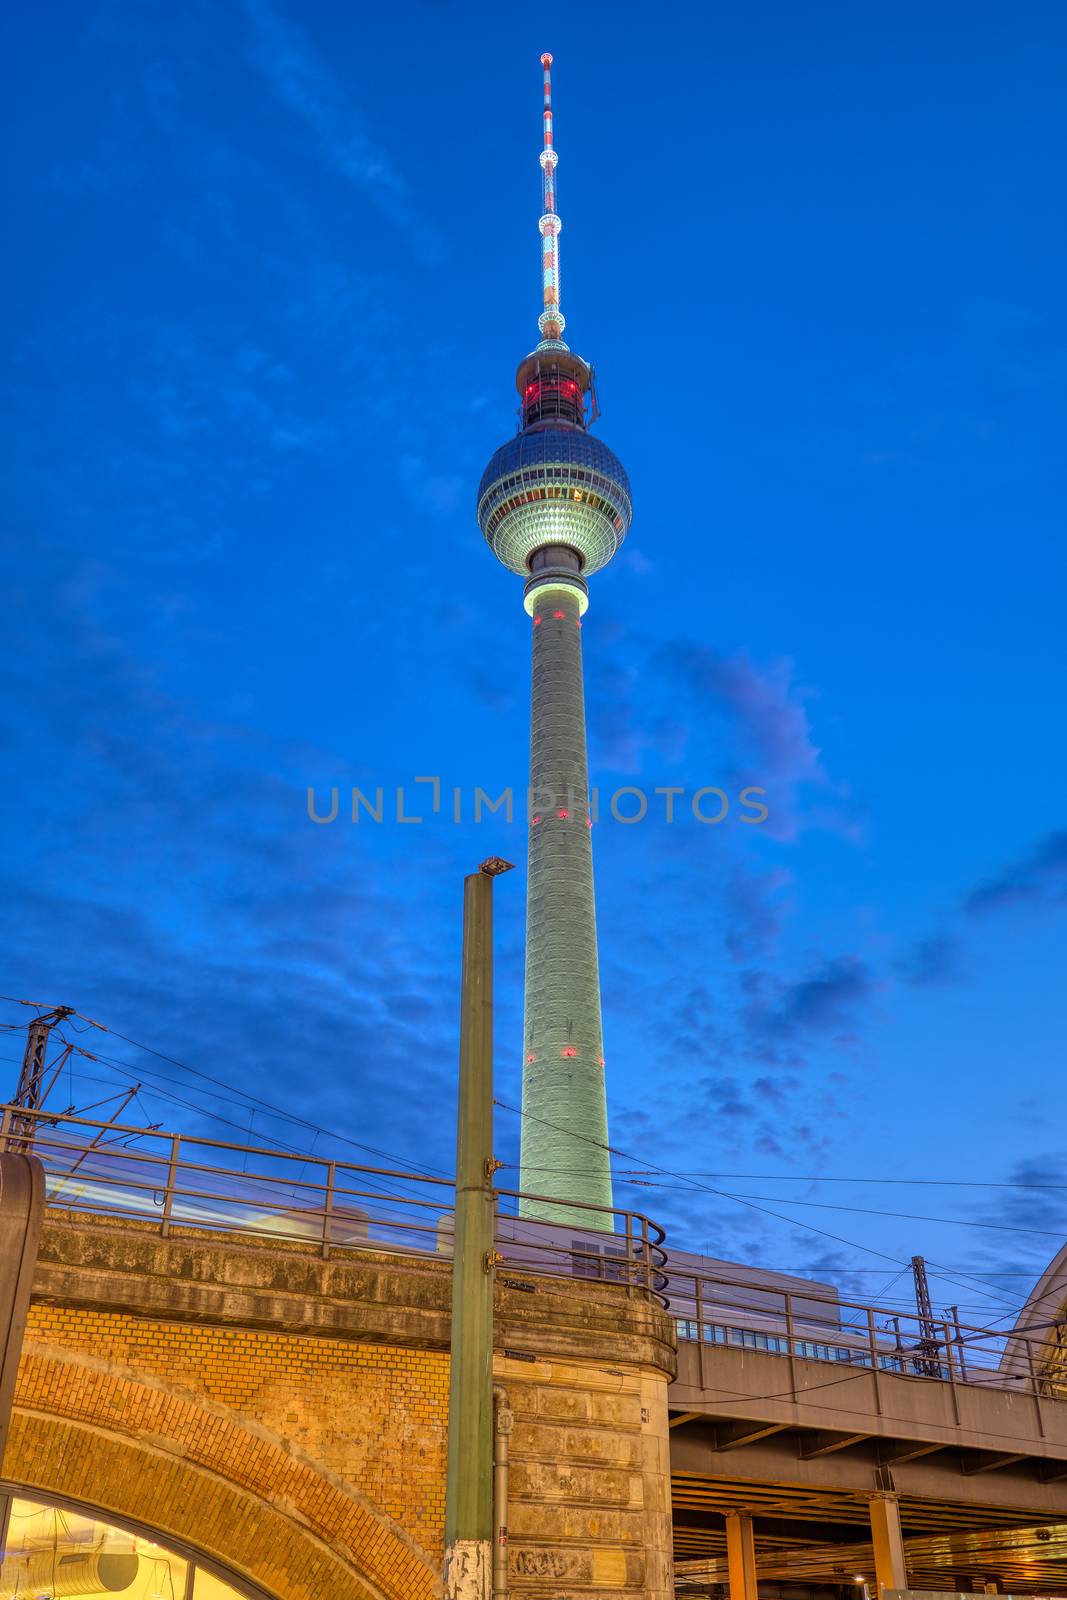 The famous Television Tower in Berlin at night